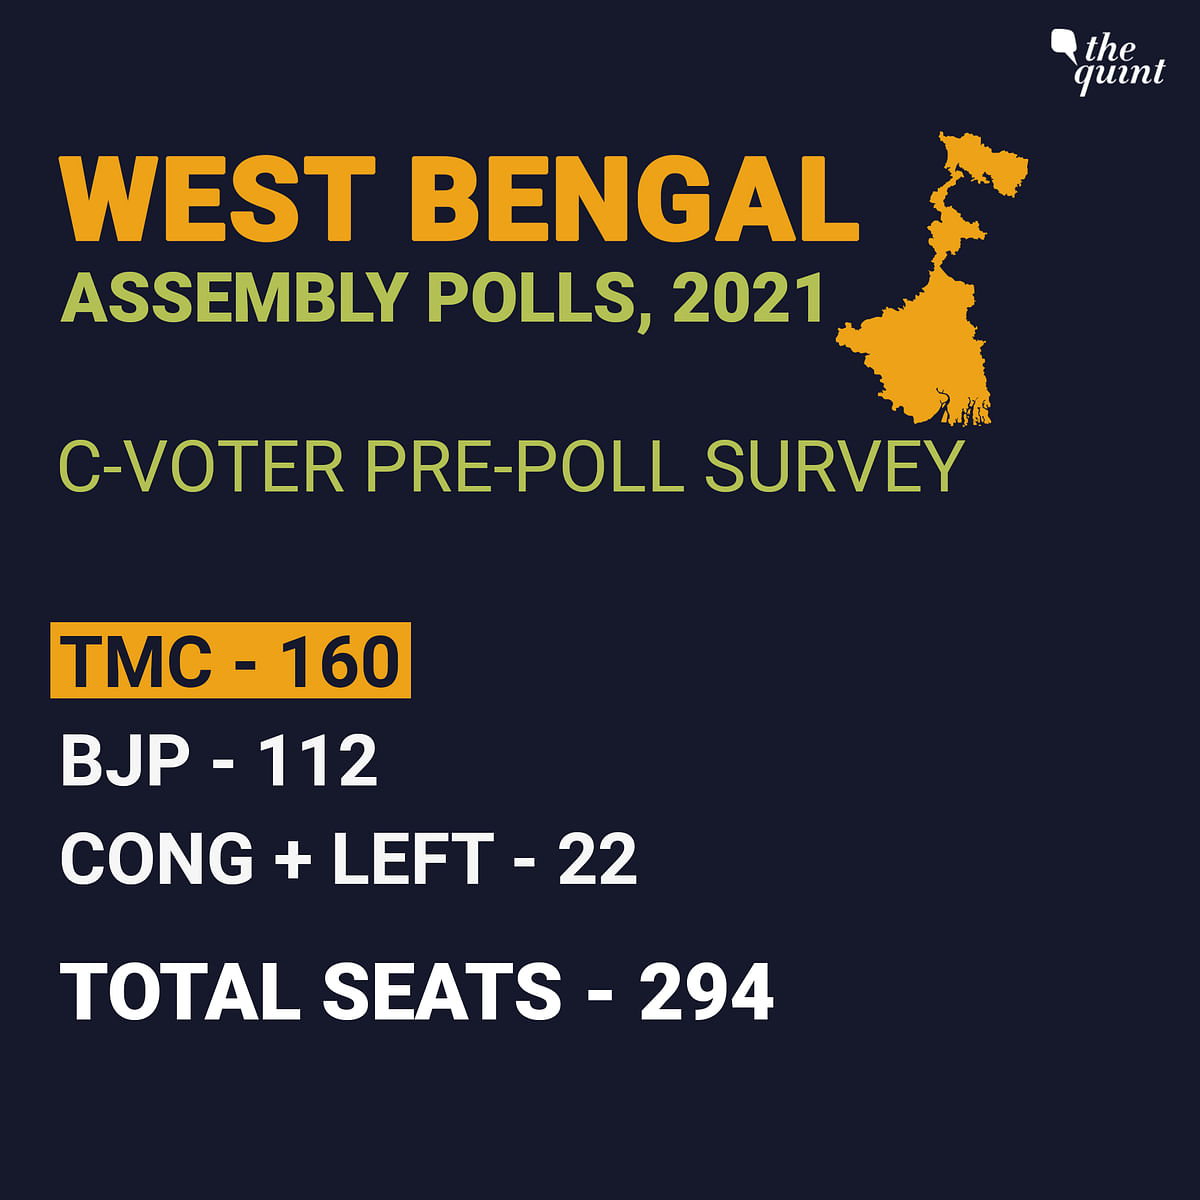 The BJP is expected to win around 112 seats in Bengal, a massive jump from the 3 seats it won in 2016.